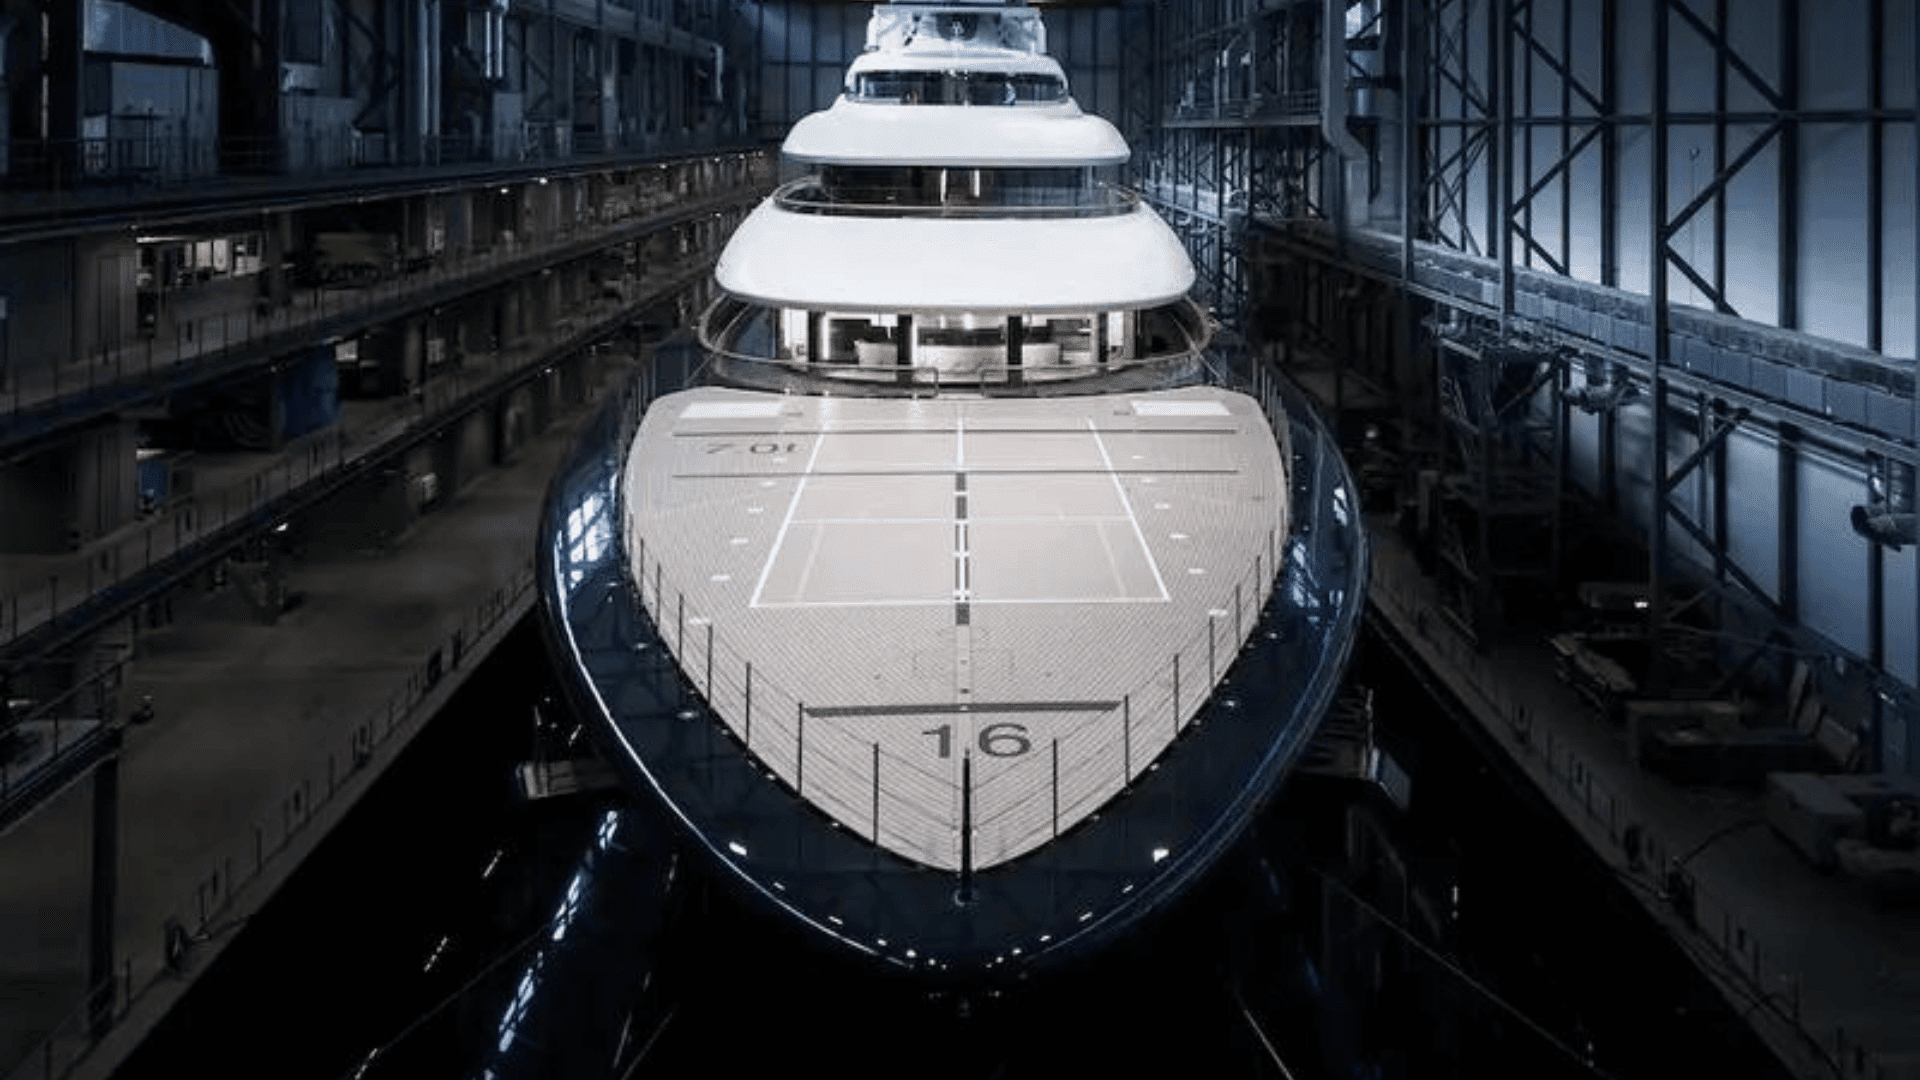 The superyacht’s liquid hydrogen must remain in cryogenic tanks cooled to -423.4 degrees Fahrenheit. Credit: Feadship